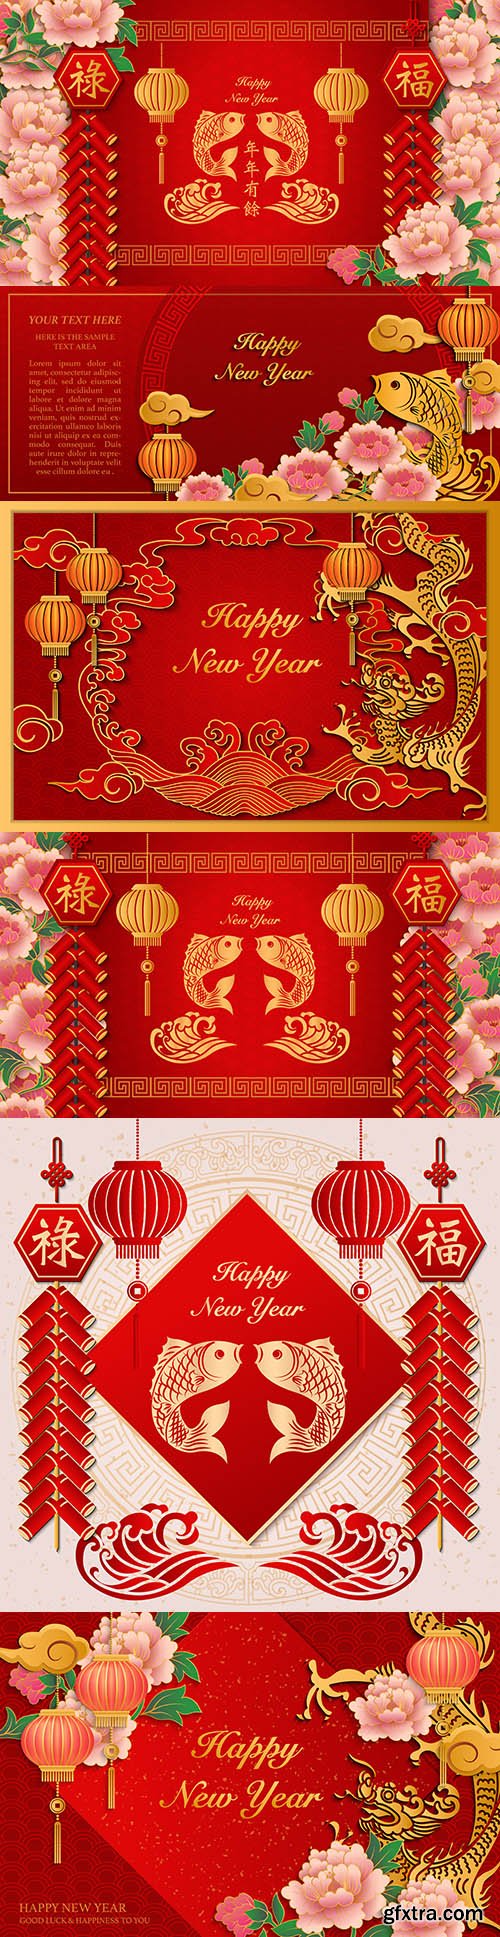 Happy Chinese New Year retro red design illustration